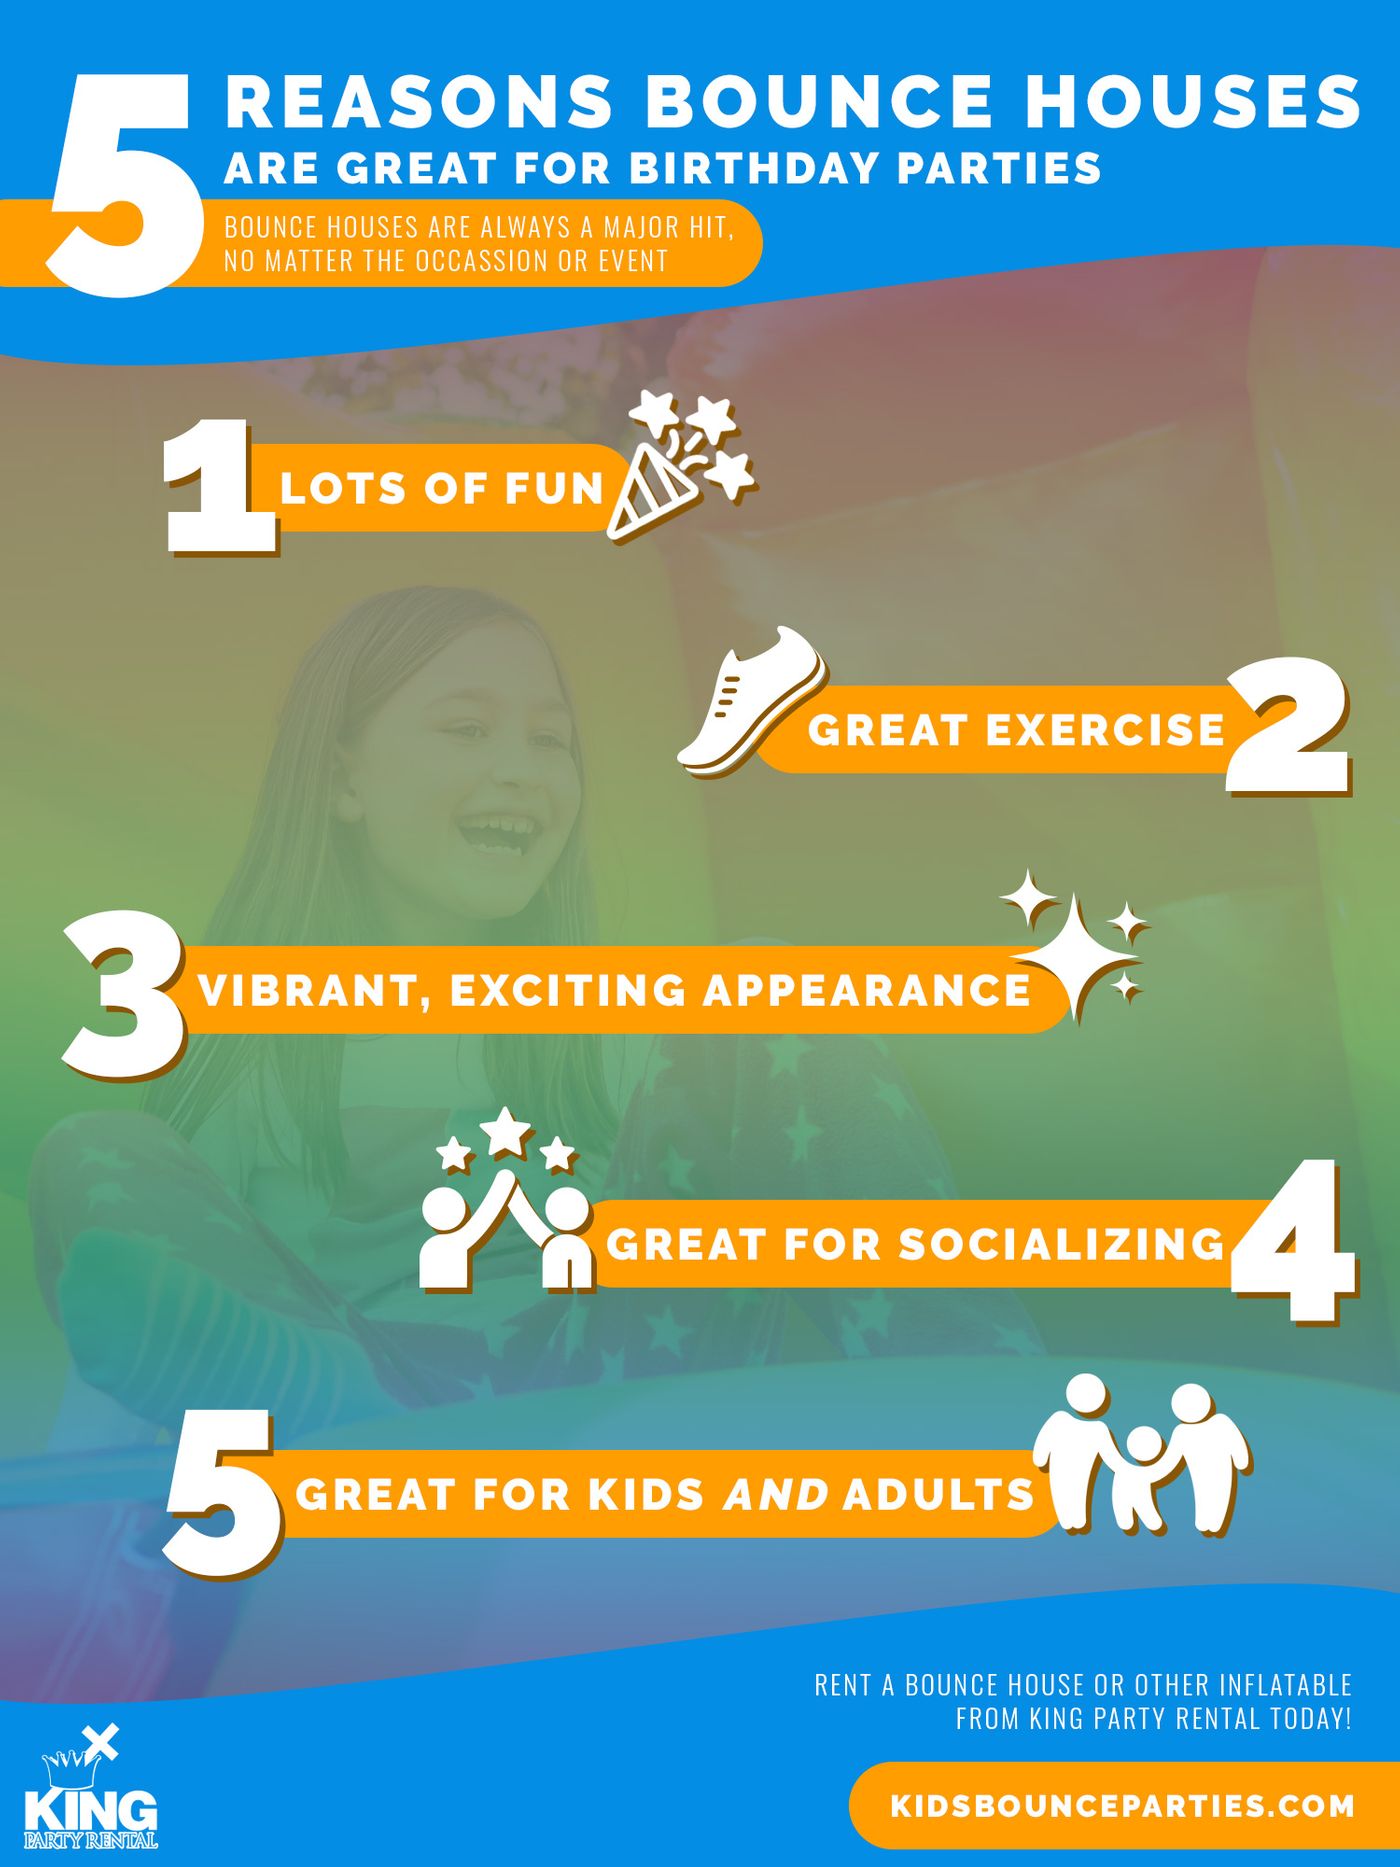 5 reasons bounces houses are great for parties - infographic